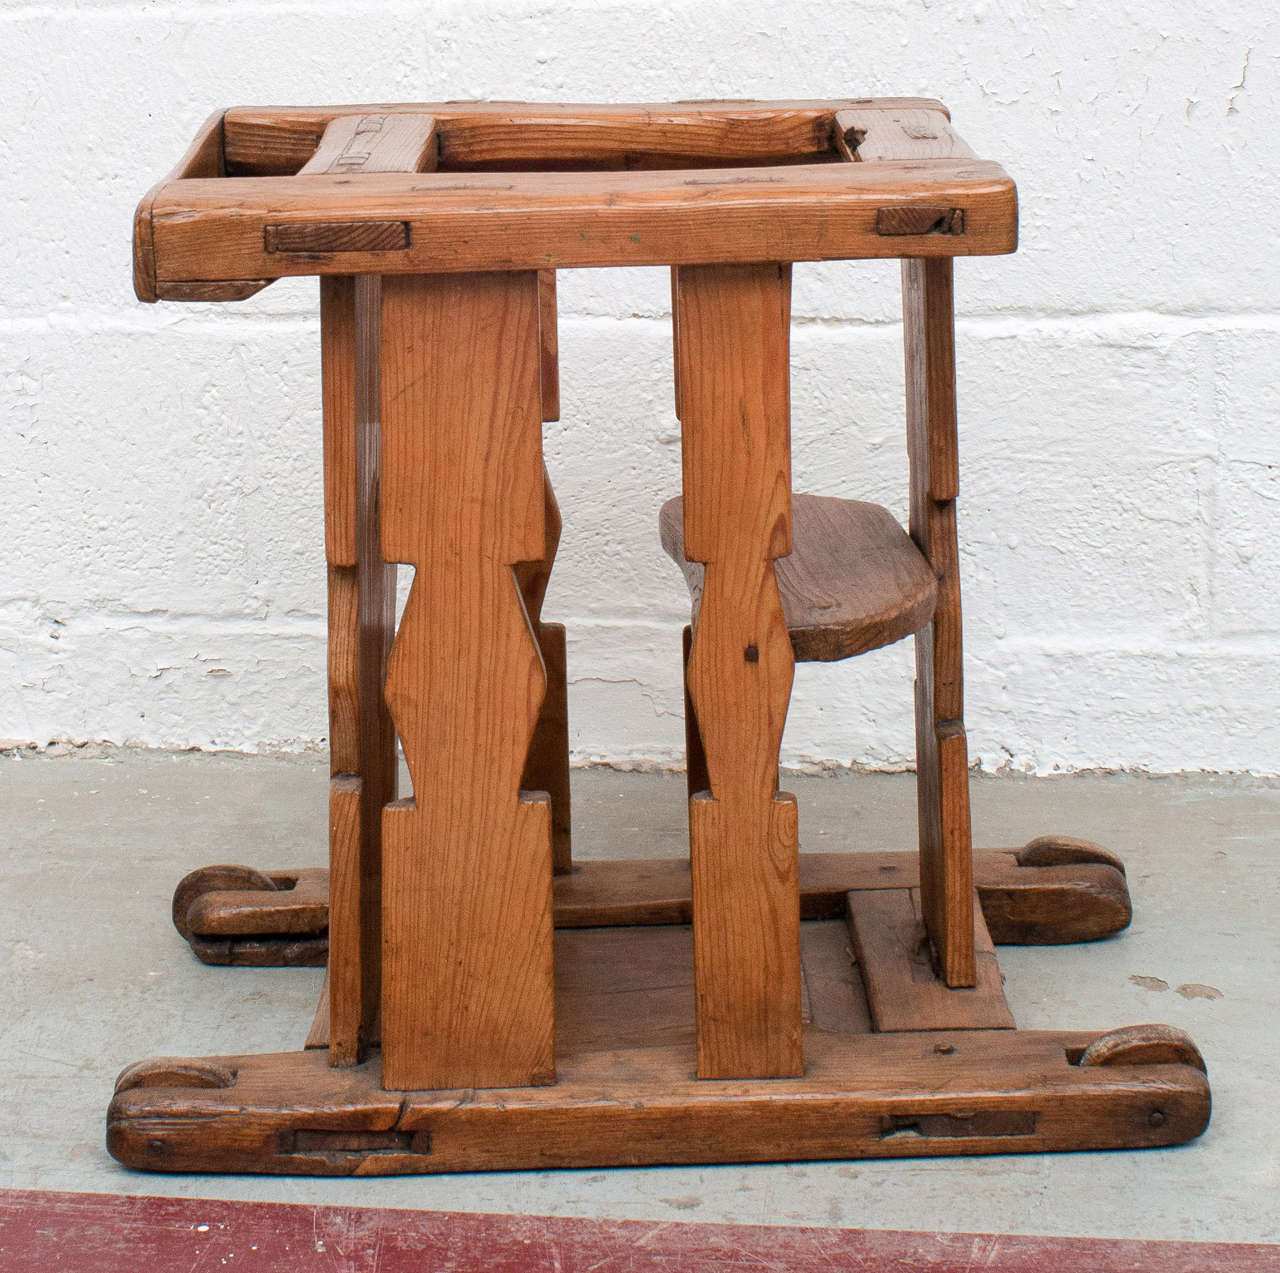 A delightful and fascinating infant's rolling low chair built of pitch pine and featuring superb through-tenon construction.  A small tray at the front can contain little amusements.  The wooden wheels have long since worn to ovals so it doesn't